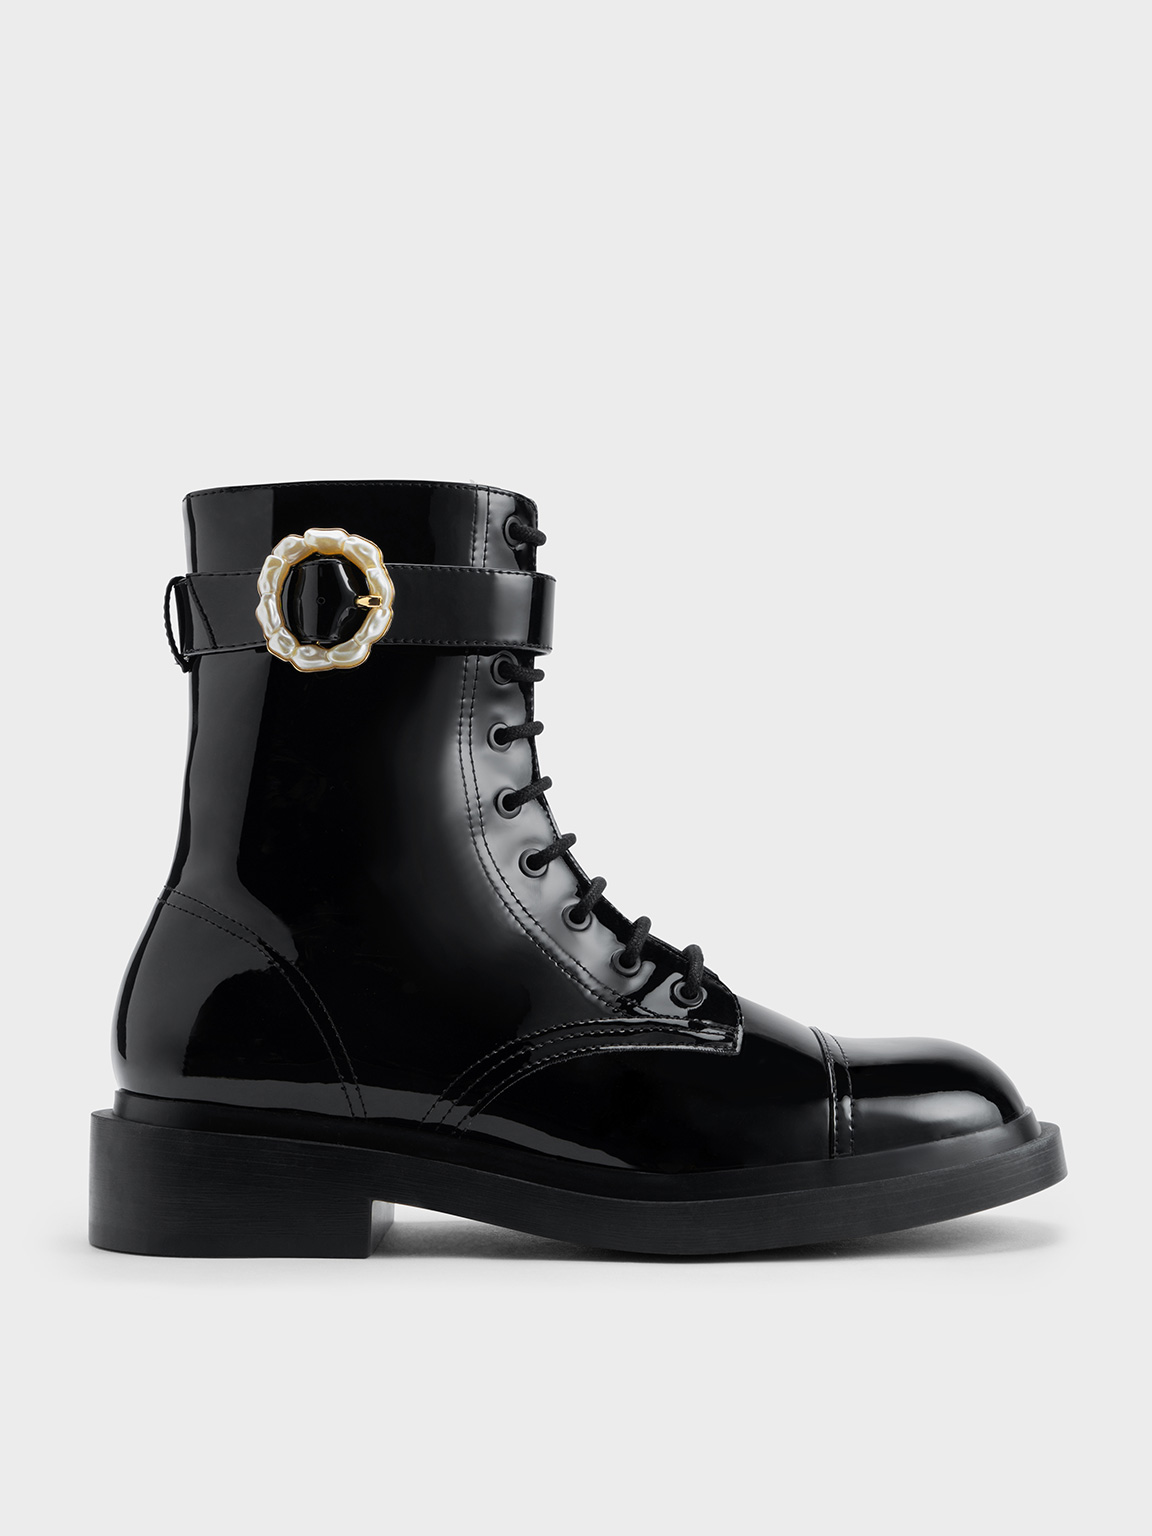 Louis Vuitton Midtown Ankle Boot in Black